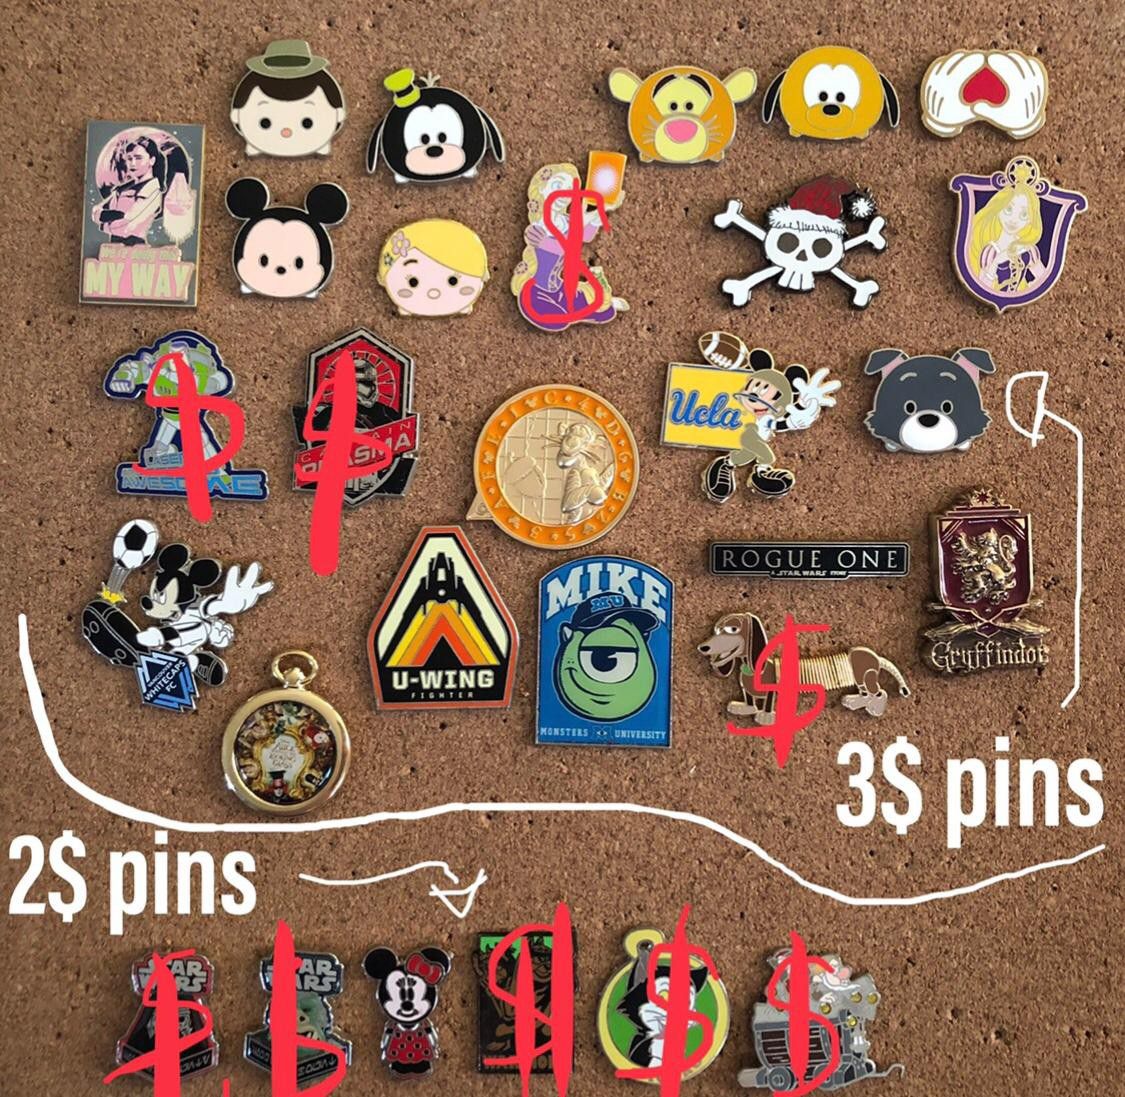 Disney and universal trading pins all authentic and tradable two prices FIRM